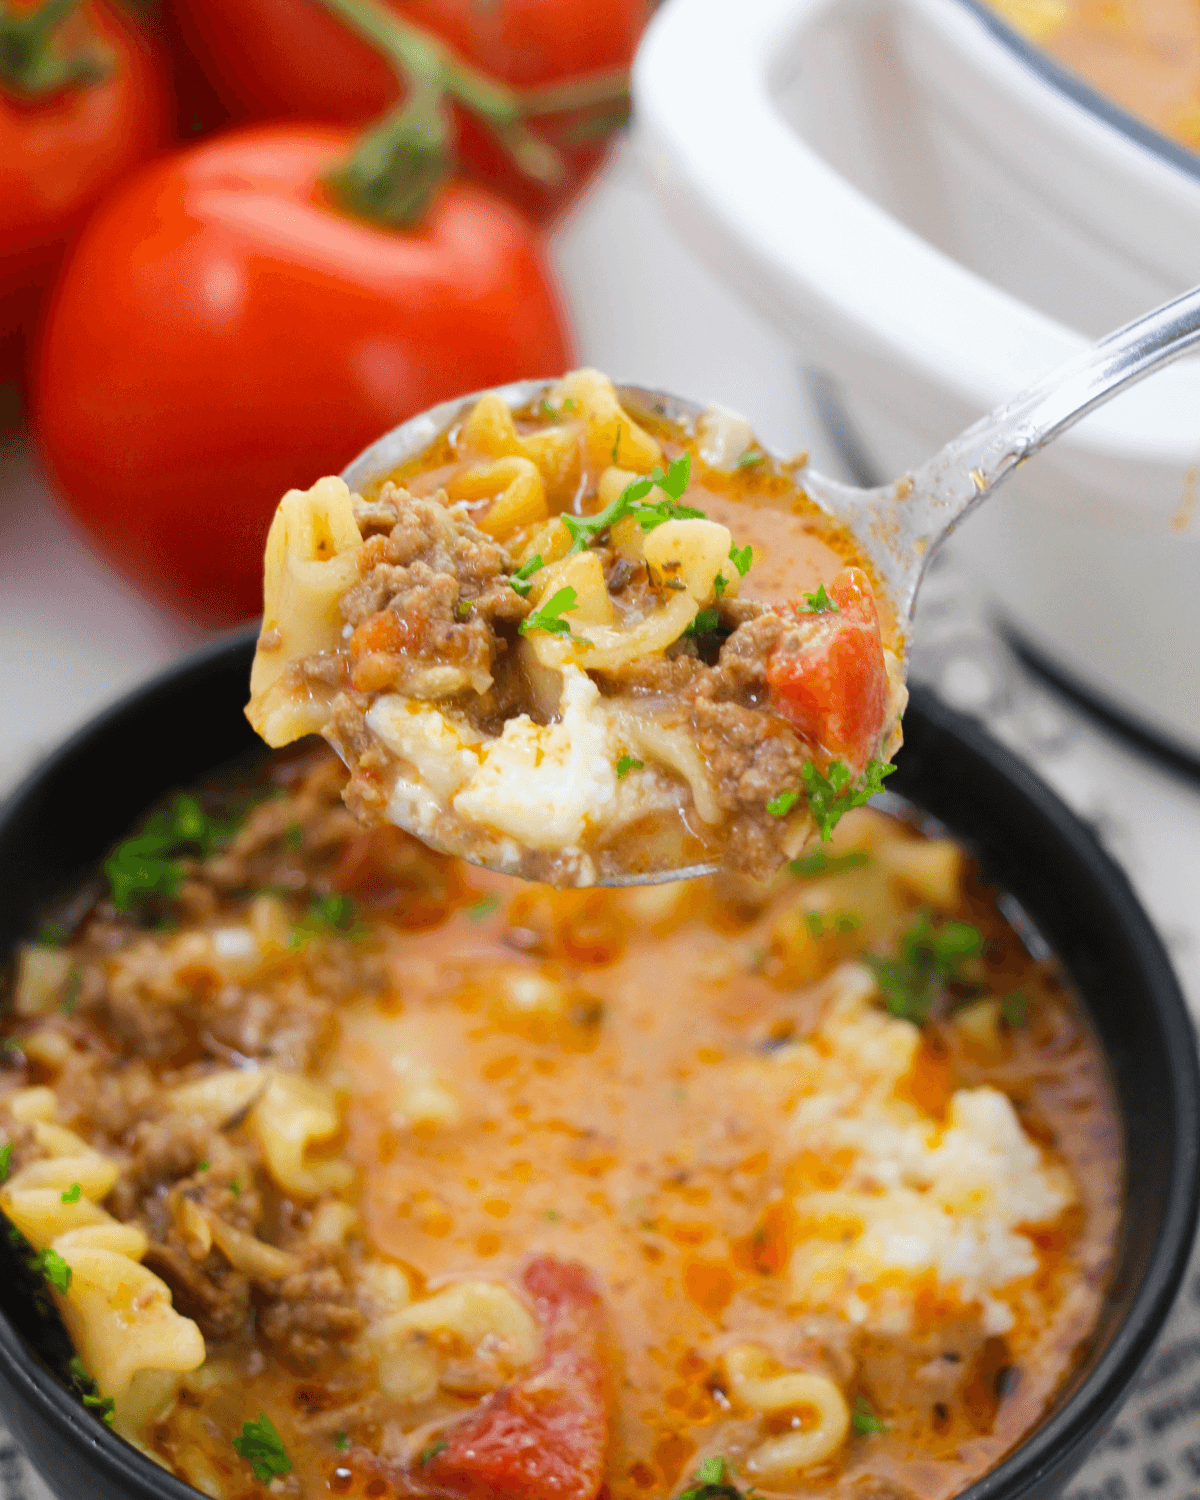 Savor a hearty bowl of One Pot Lasagna Soup brimming with meat and tomatoes.